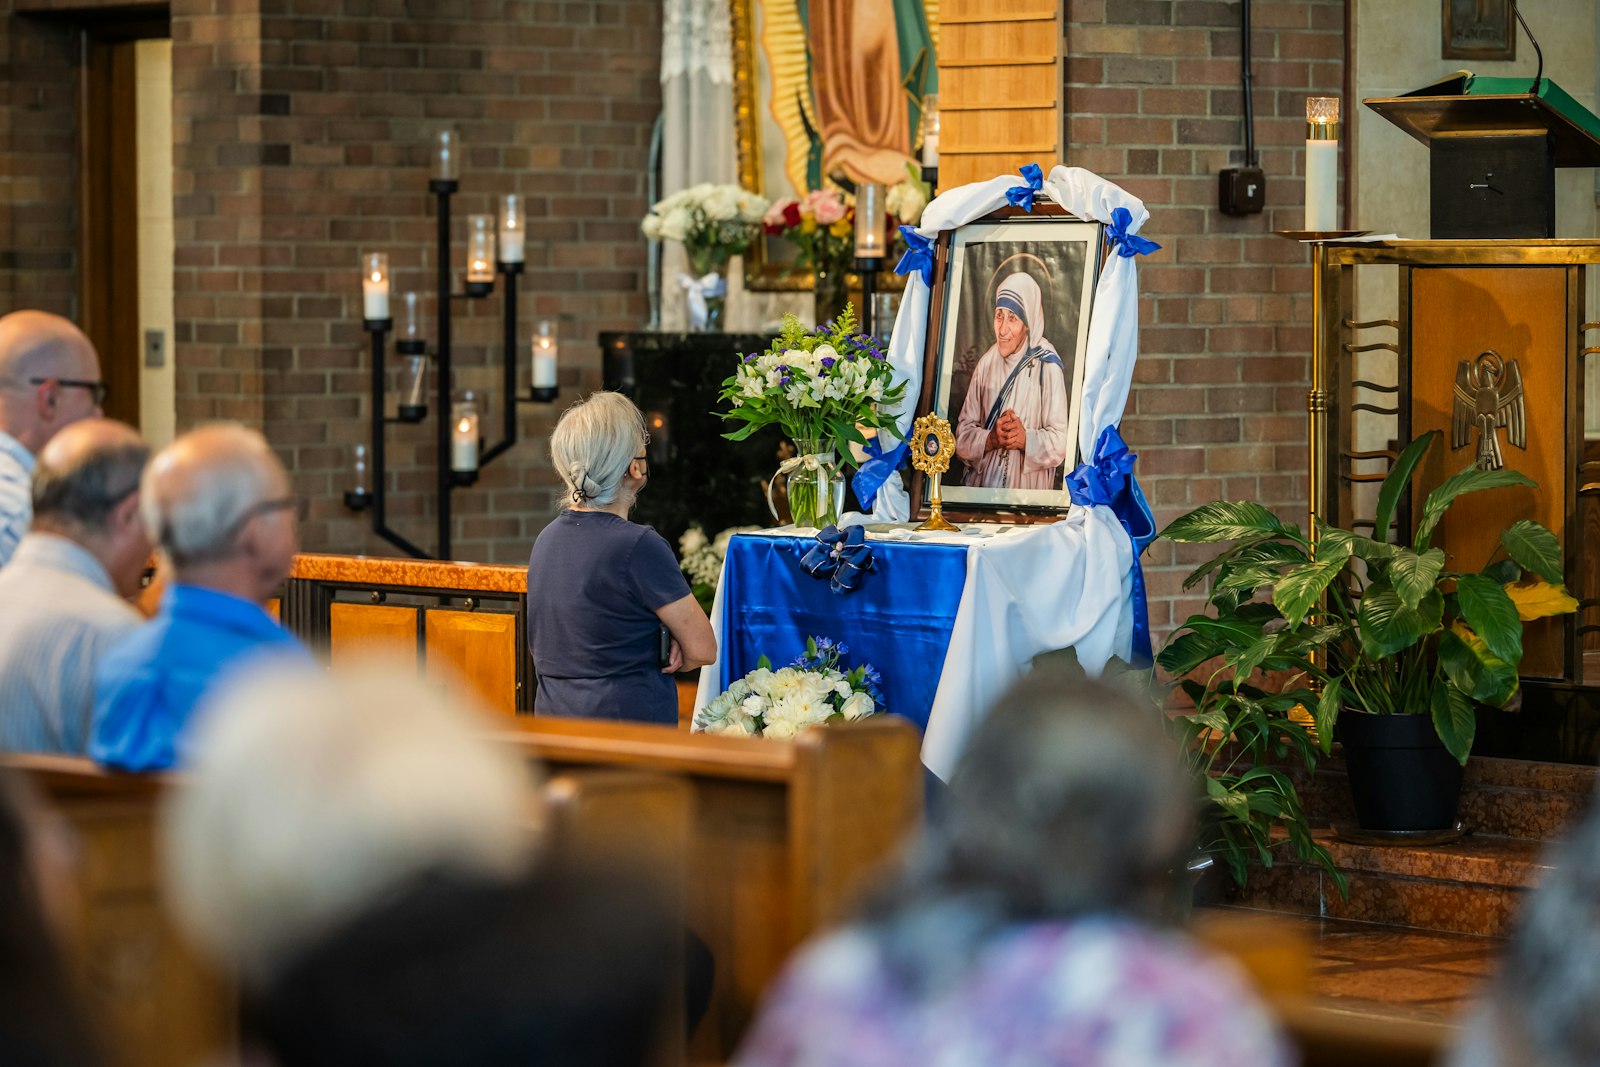 A woman prays in front of a relic of St. Teresa.